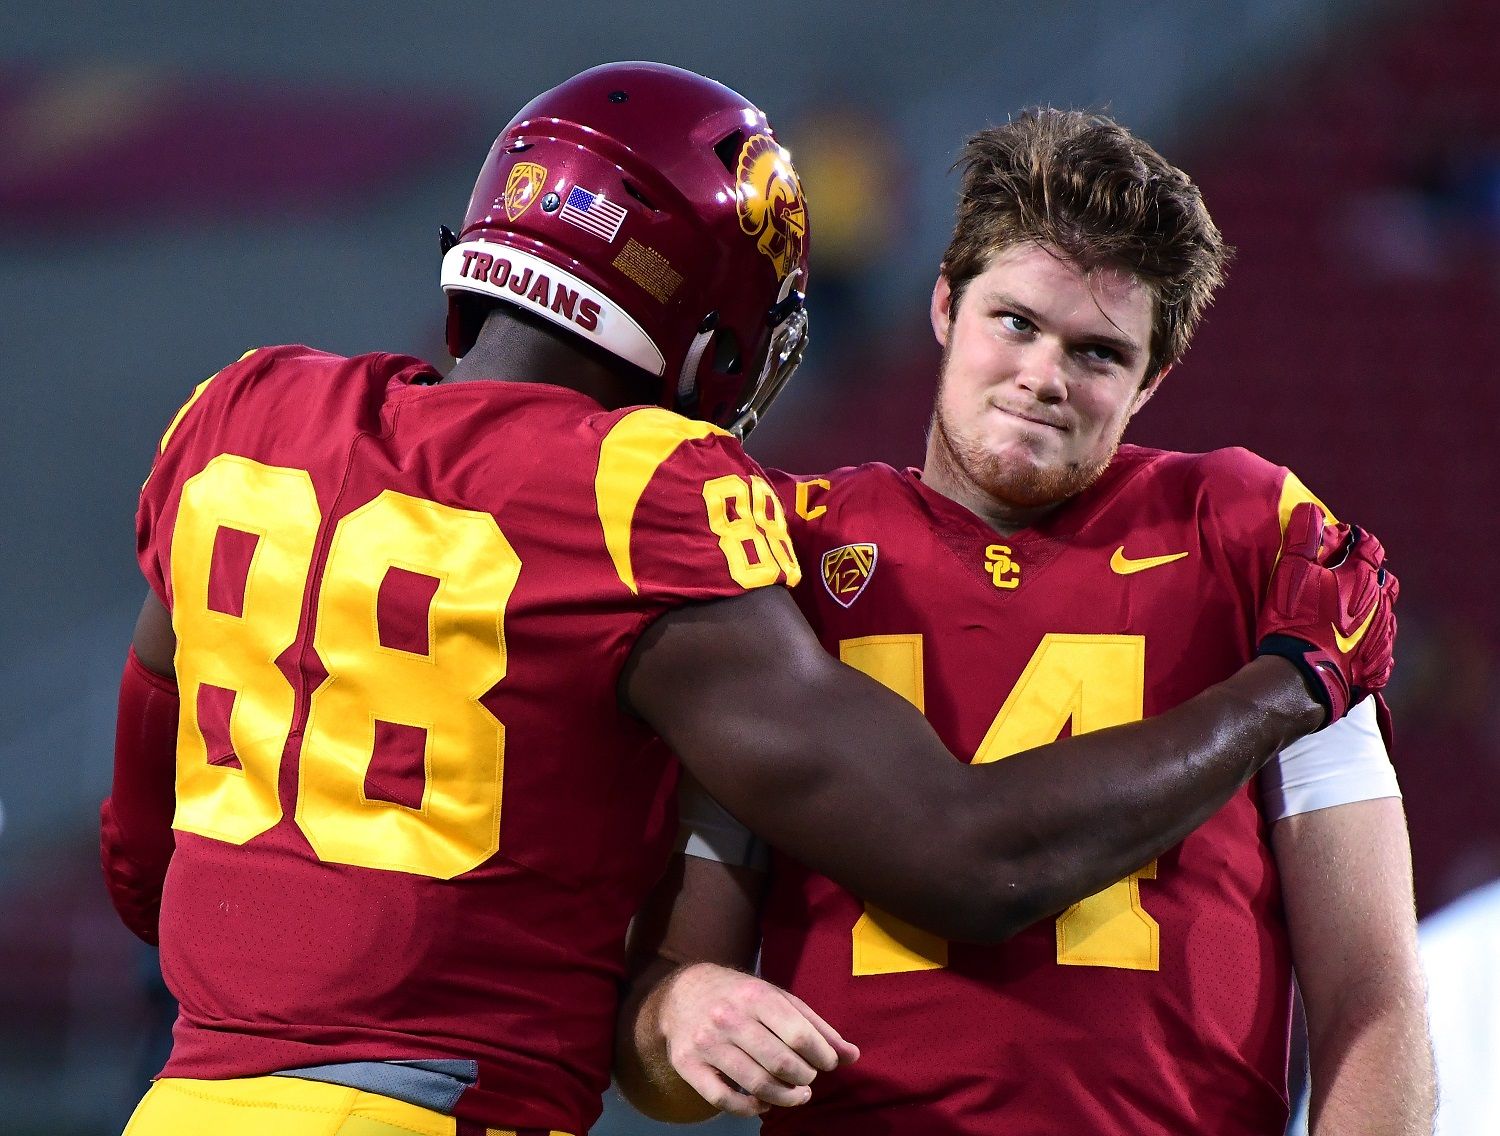 LOS ANGELES, CA - NOVEMBER 18:  Sam Darnold #14 of the USC Trojans jokes with Daniel Imatorbhebhe #88 of the USC Trojans before the game against the UCLA Bruins at Los Angeles Memorial Coliseum on November 18, 2017 in Los Angeles, California.  (Photo by Harry How/Getty Images)